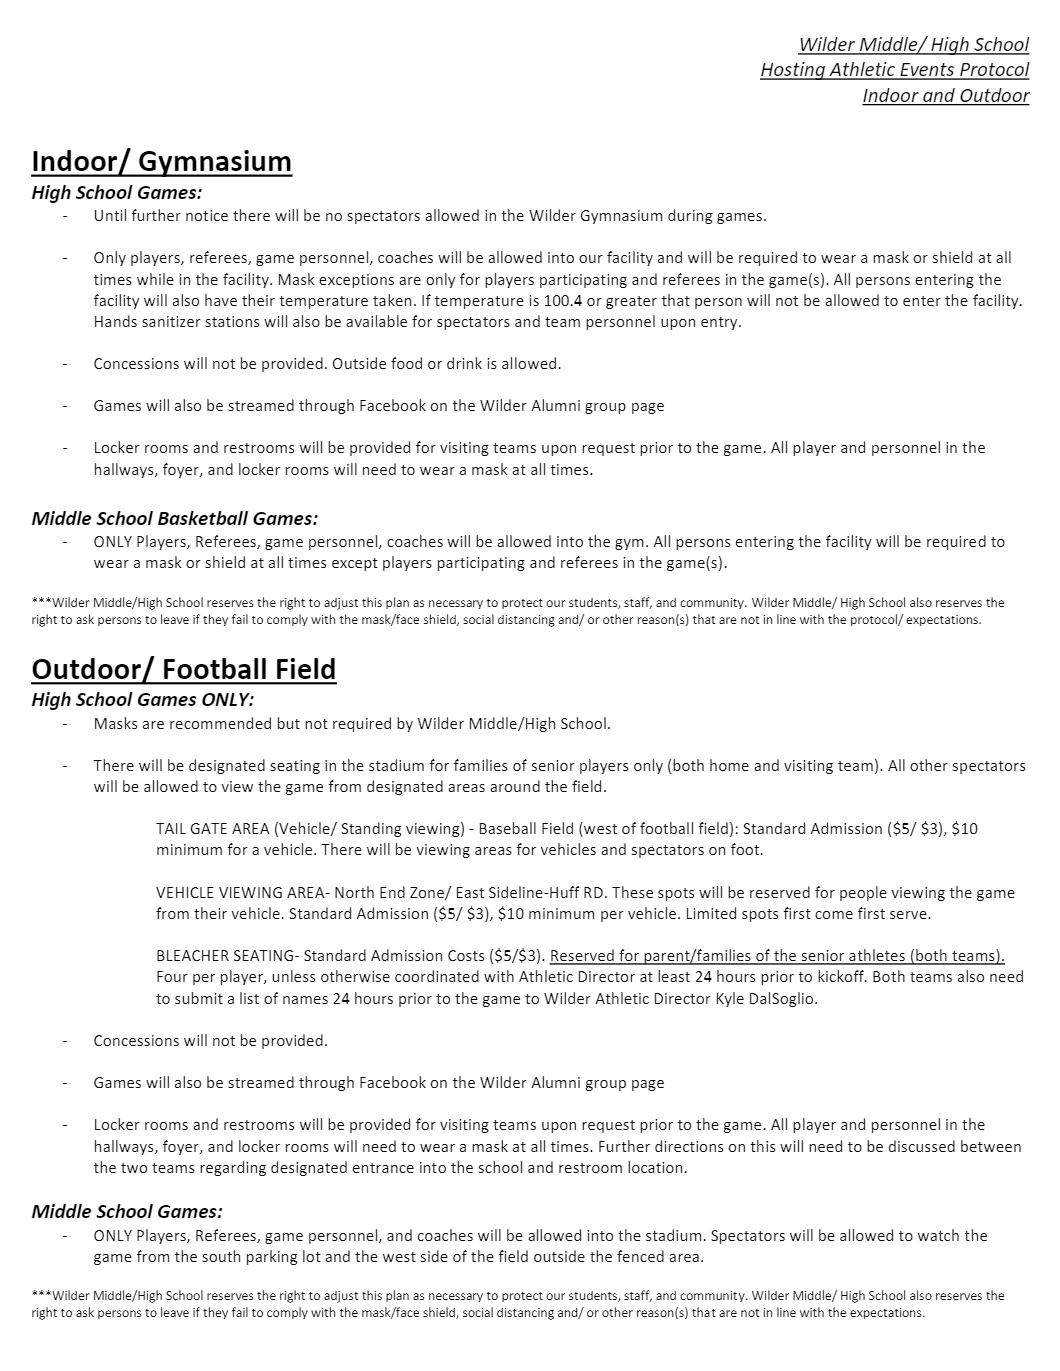 Wilder Athletics Home Game Protocol Page 1 / 1Zoom 100%